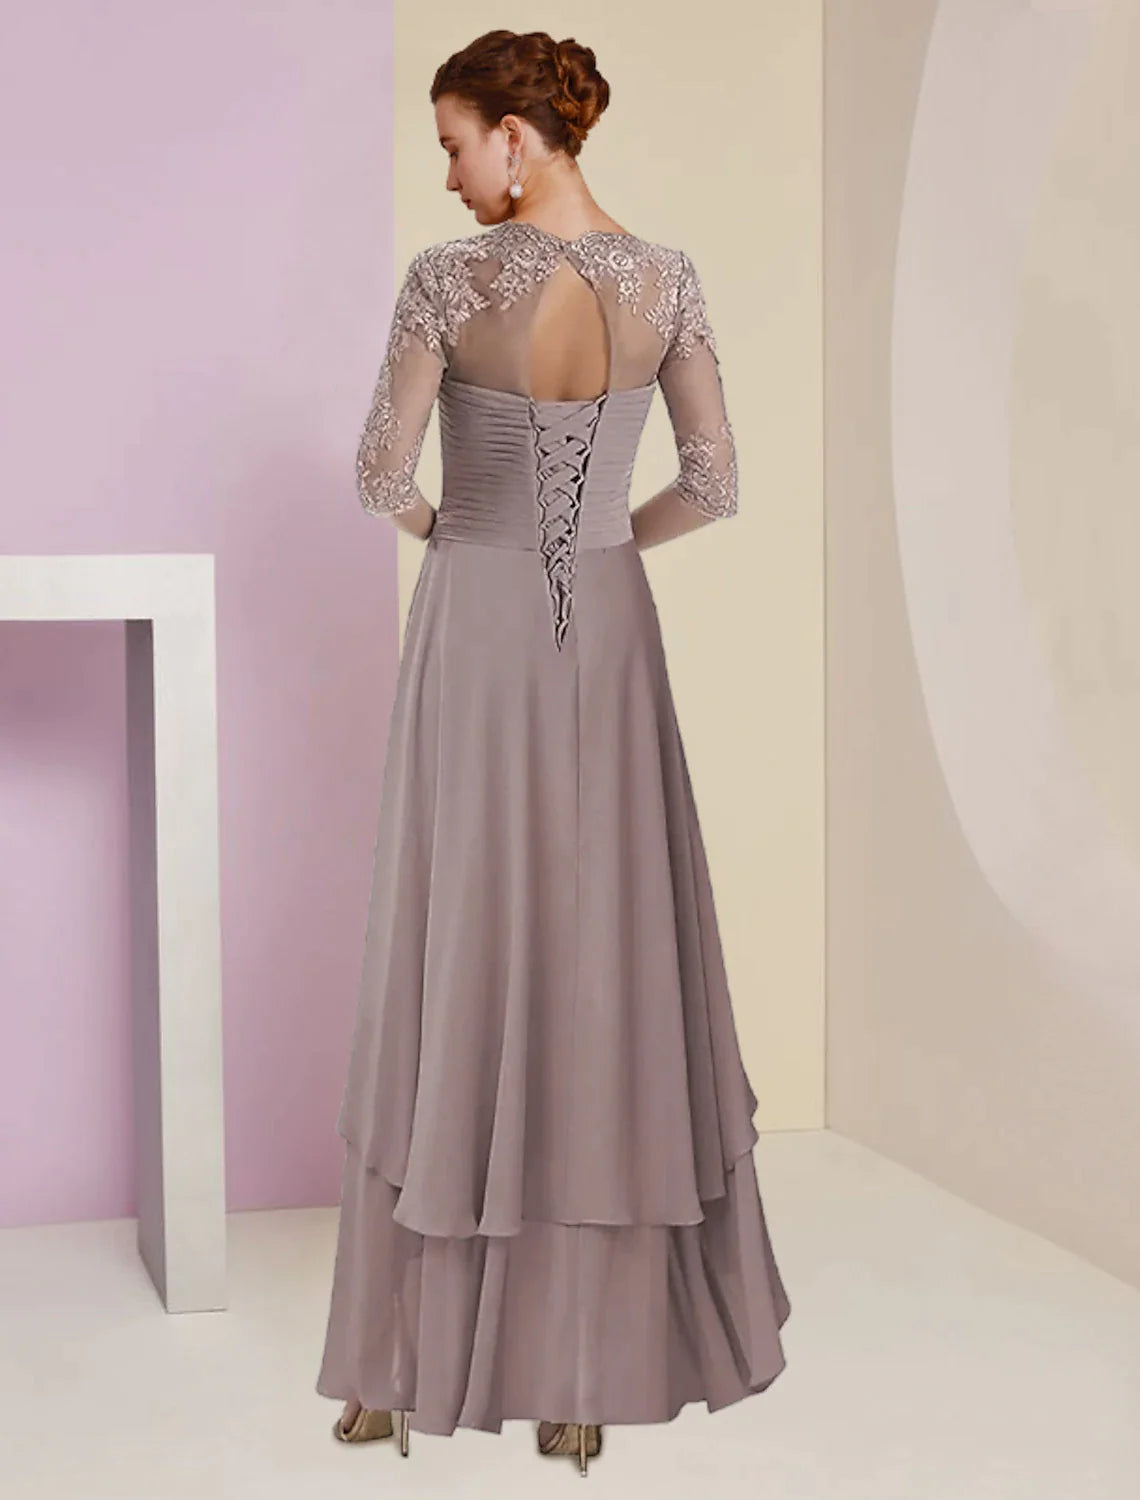 Two Piece A-Line Mother of the Bride Dress Formal Wedding Guest Elegant Square Neck Asymmetrical Tea Length Chiffon Lace 3/4 Length Sleeve Wrap Included with Ruched Tier Appliques